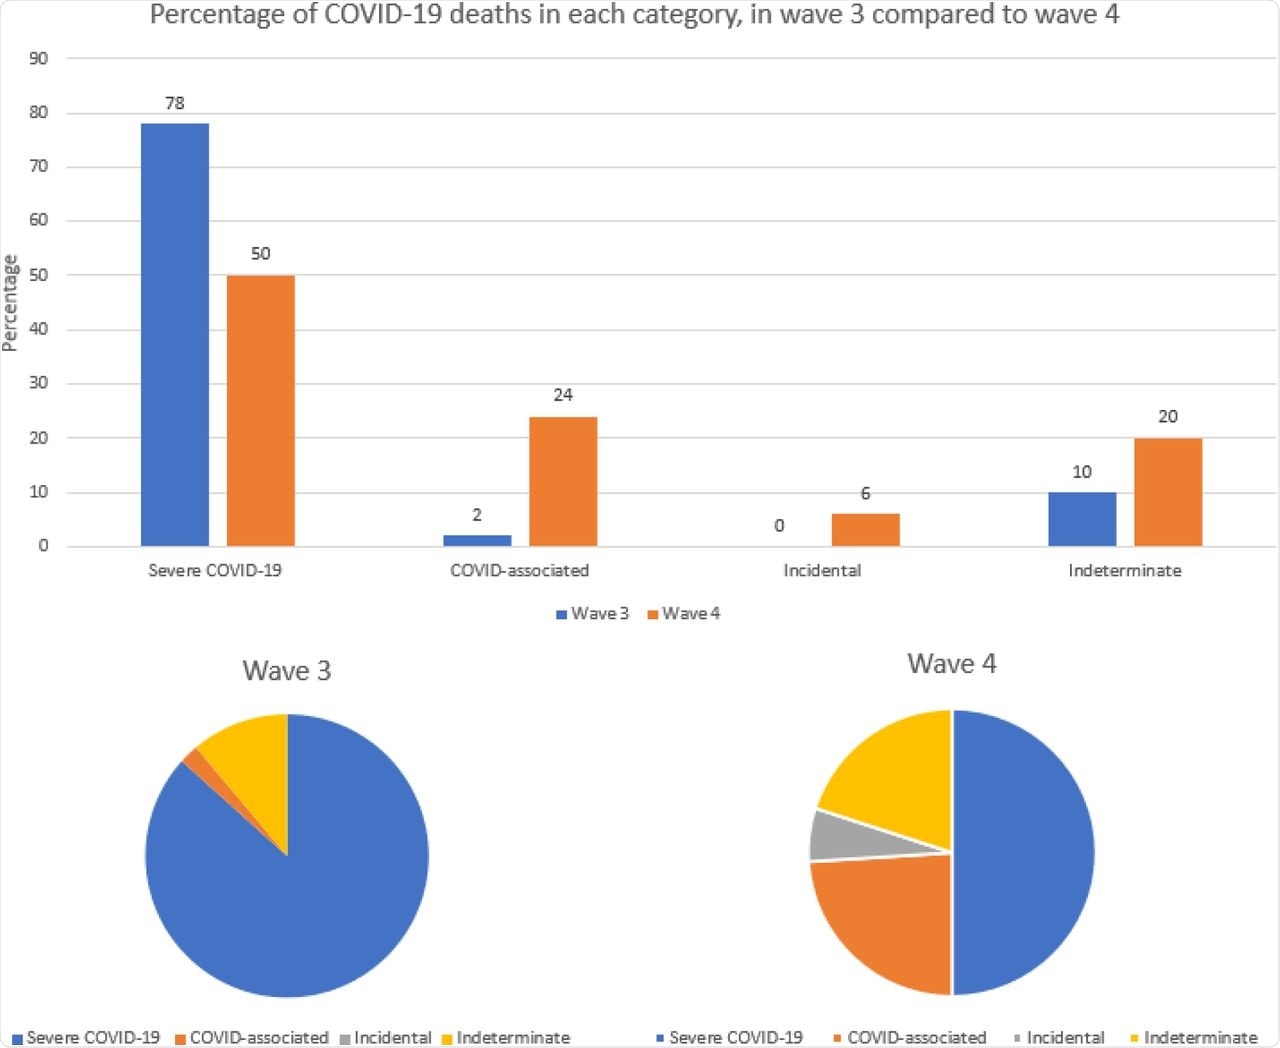 Bar graph showing percentage of COVID-19 deaths in each category in wave 3 compared to wave 4, with pie charts below showing the breakdown per wave.